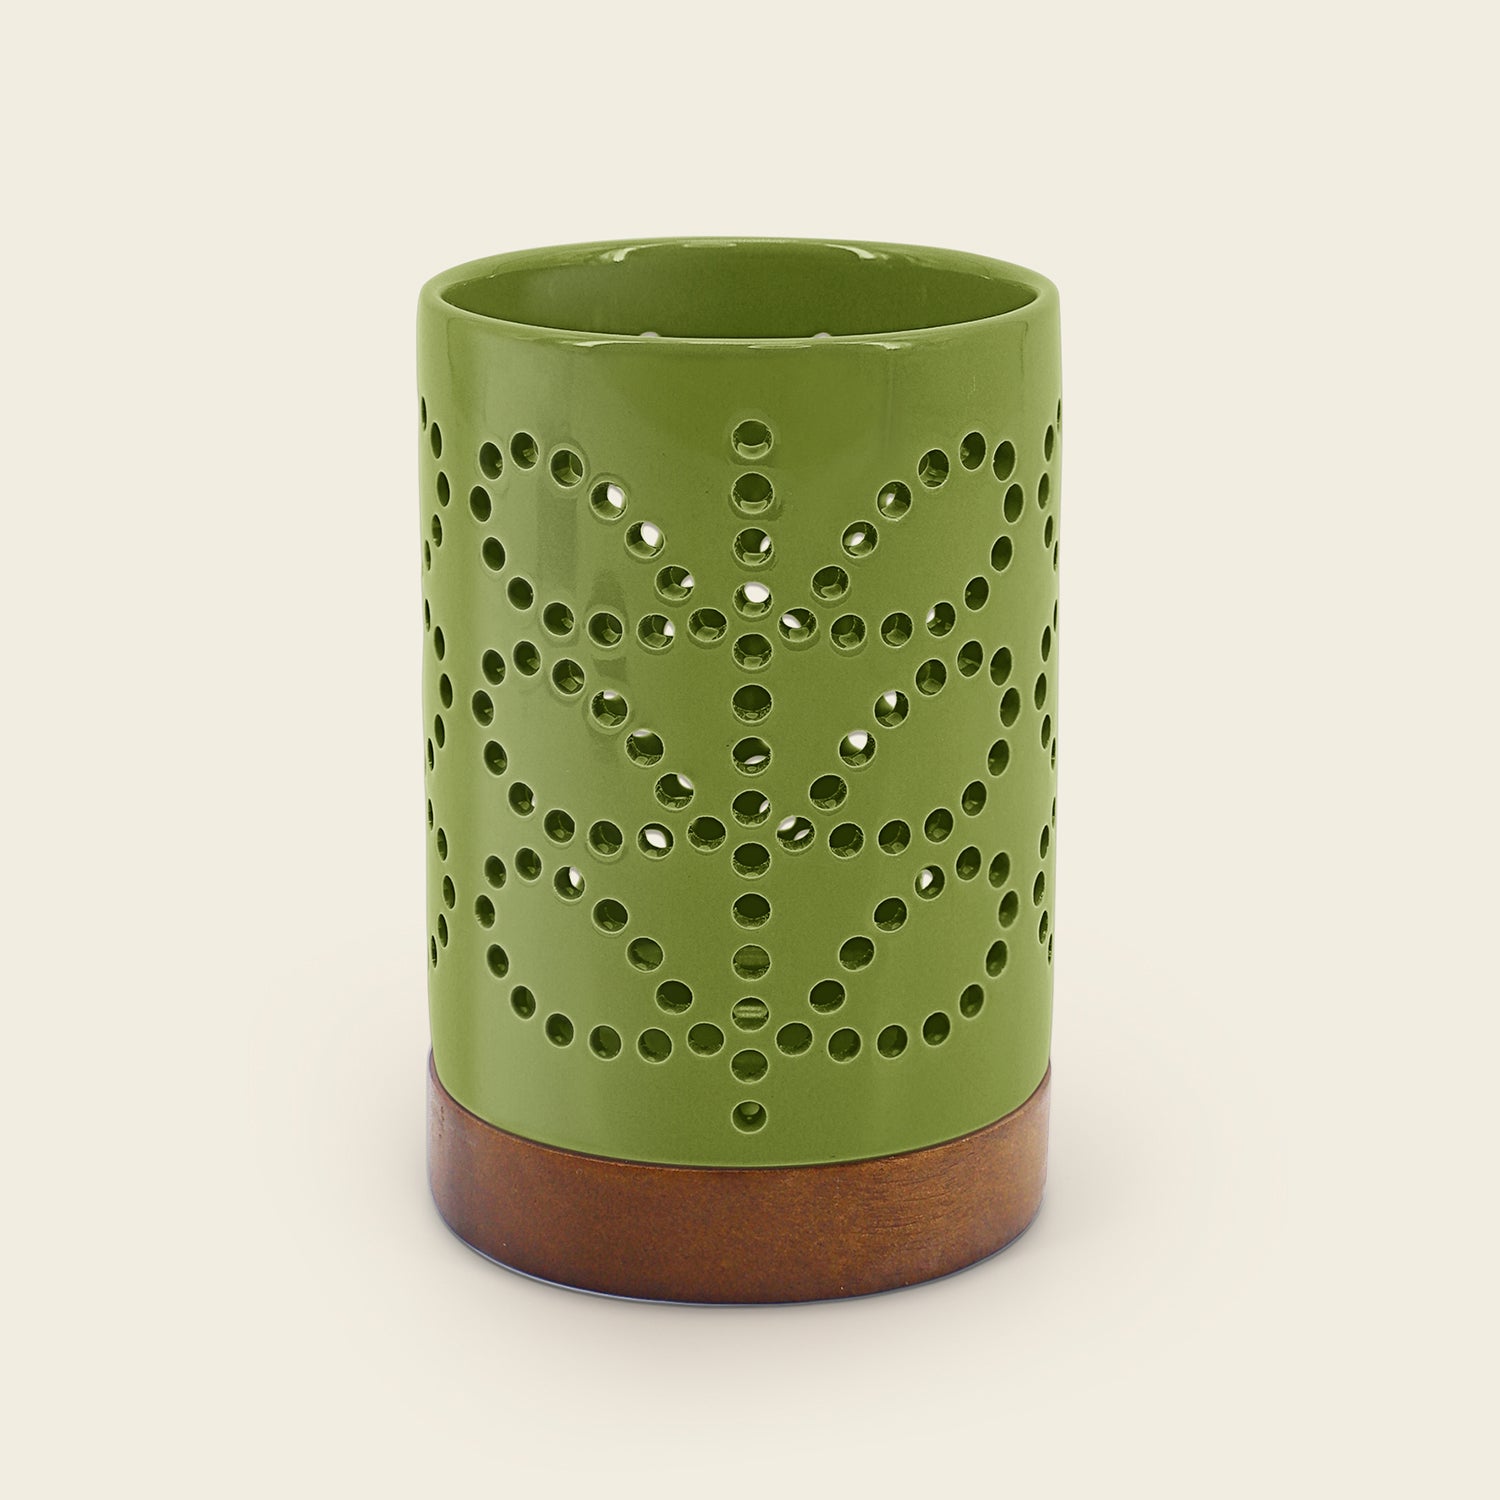 Orla Kiely Ceramic Candle Holder - Linear Stem Olive 1 Shaws Department Stores